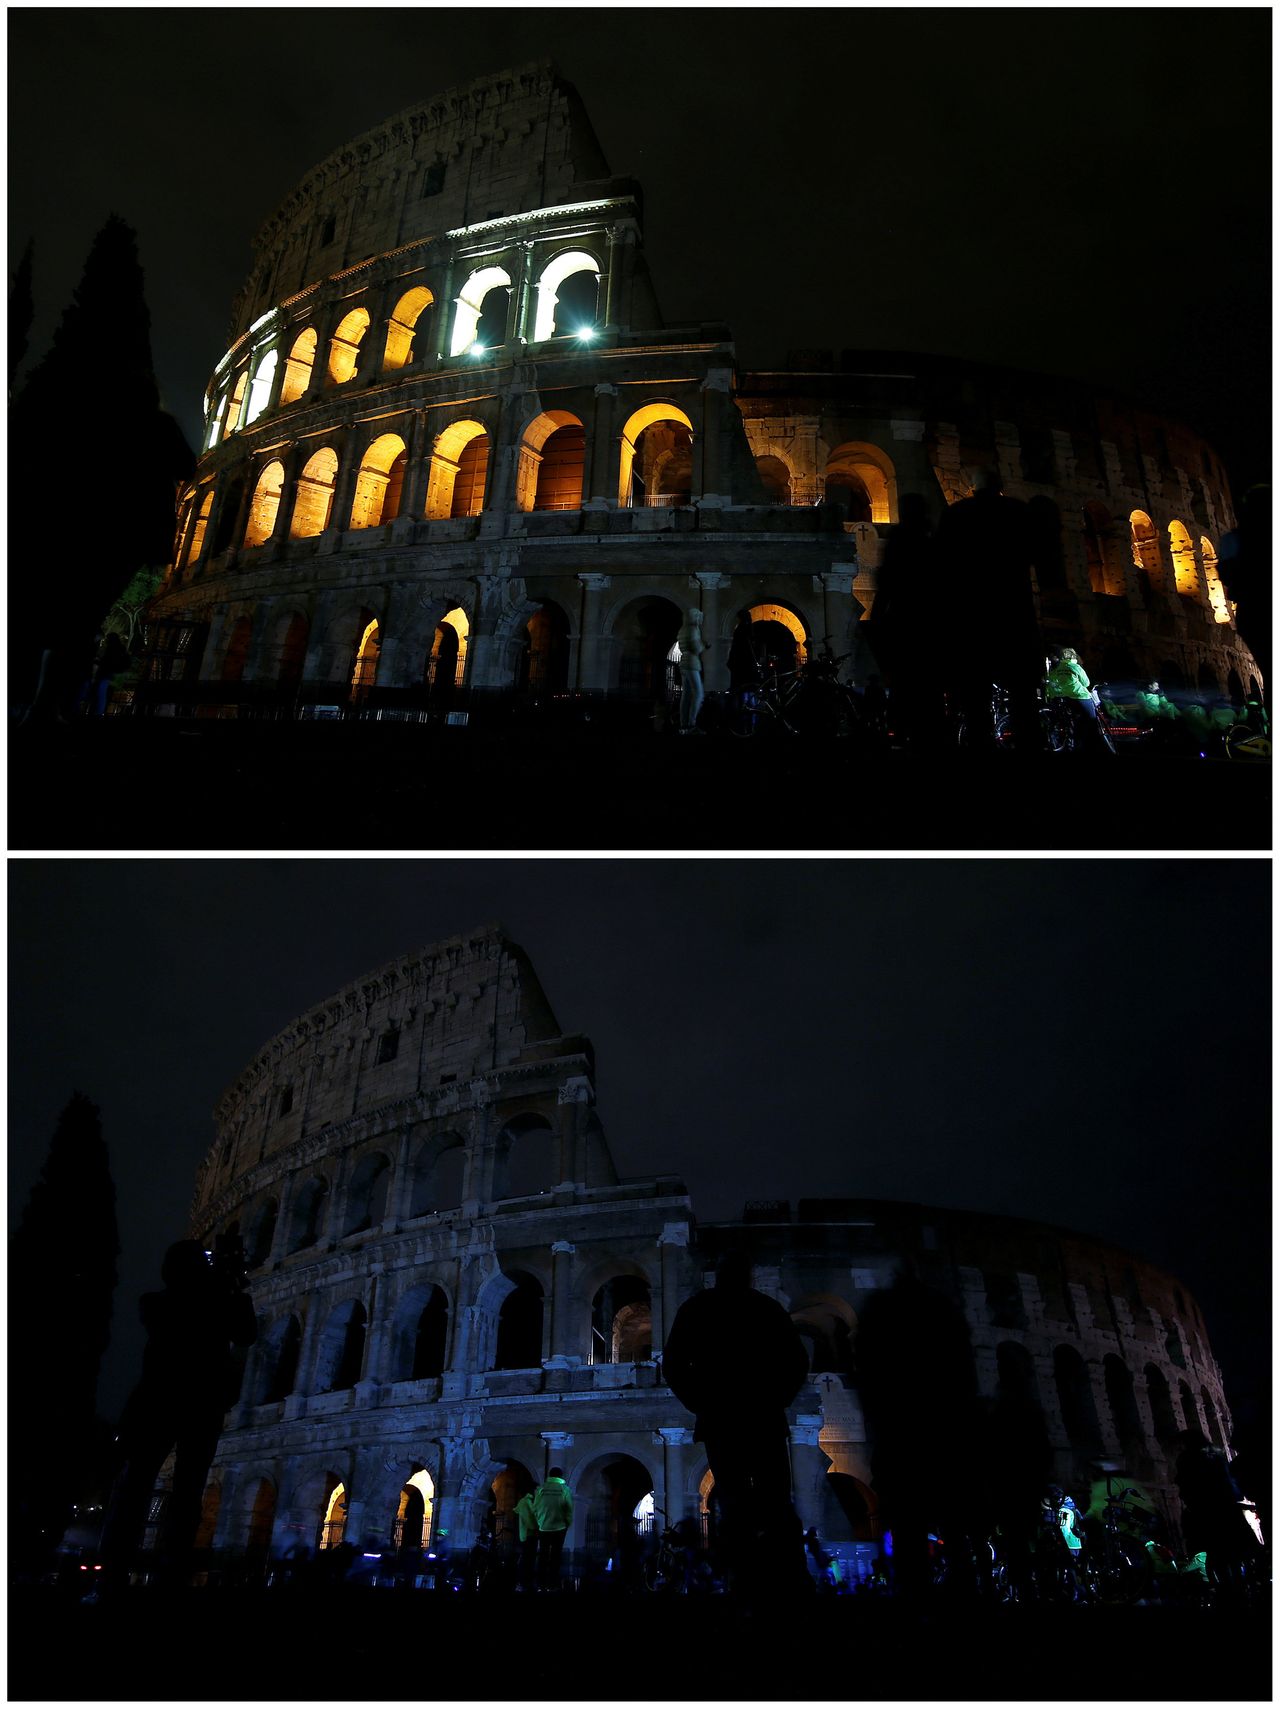 The Colosseum, before and after its lights were switched off.